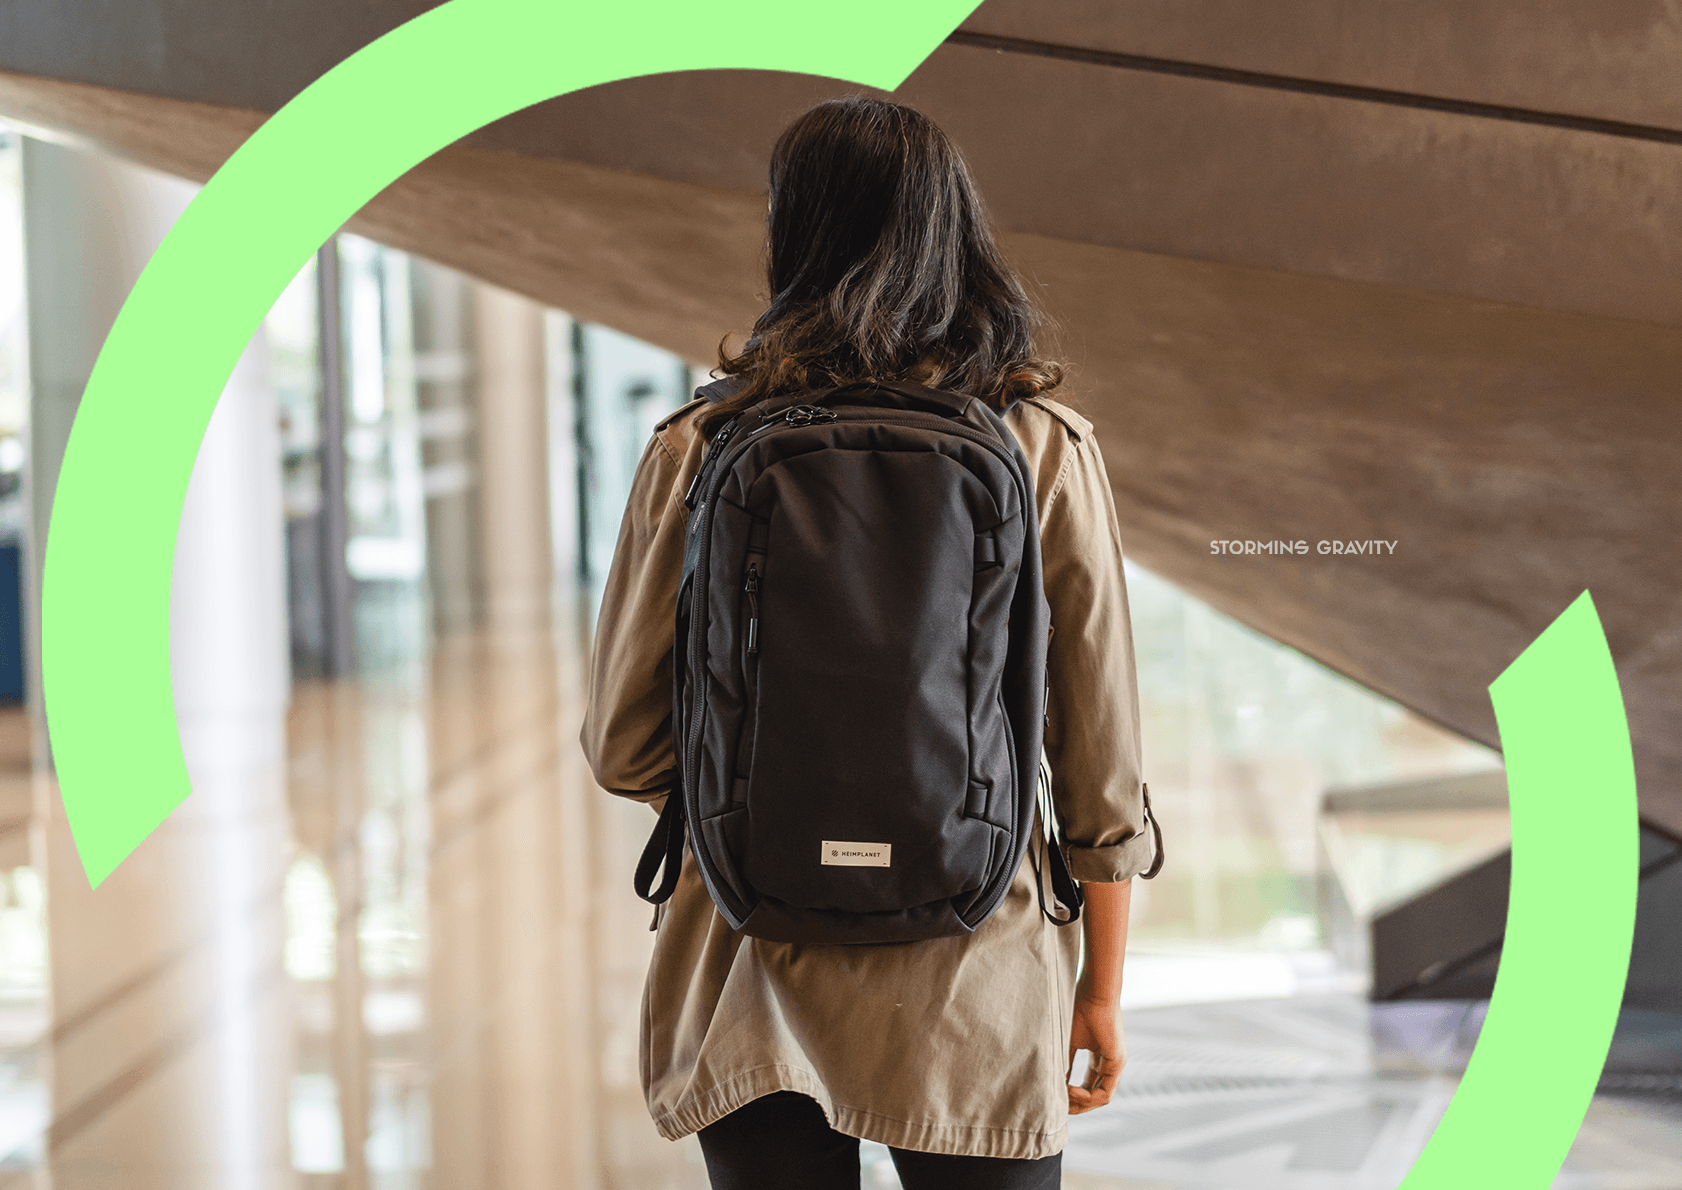 Heimplanet Transit Backpack 24L VS 28L(V2): Hot-Blooded Sibling Rivalry - Storming Gravity